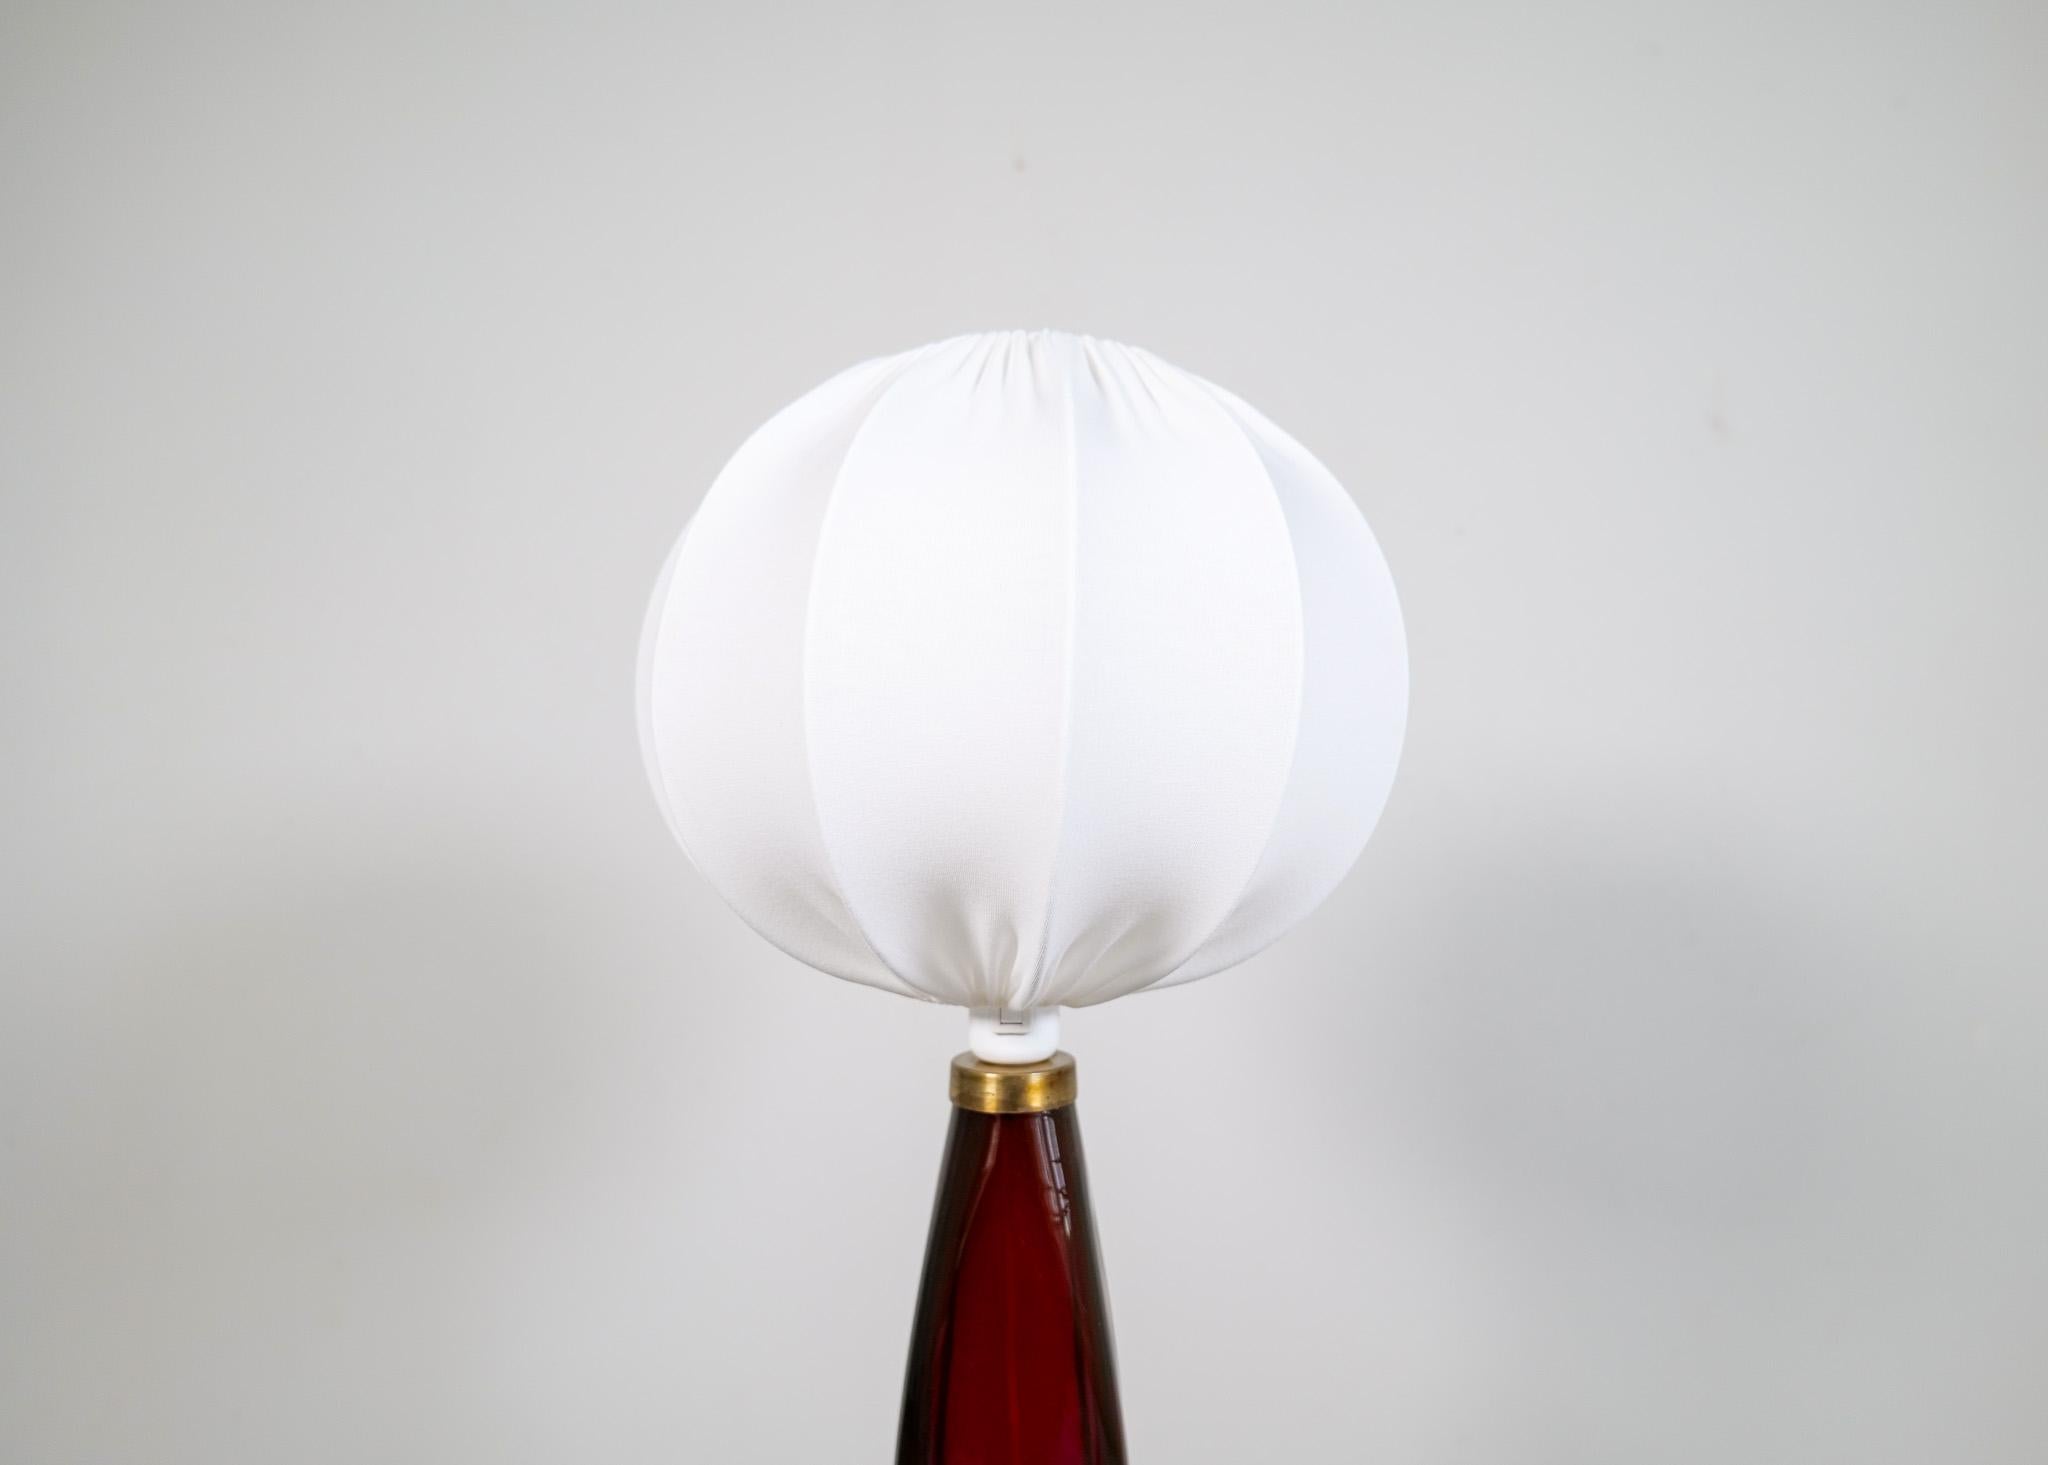 Midcentury Modern Table Lamp with Cotton Shade Carl Fagerlund Orrefors Sweden  In Good Condition For Sale In Hillringsberg, SE